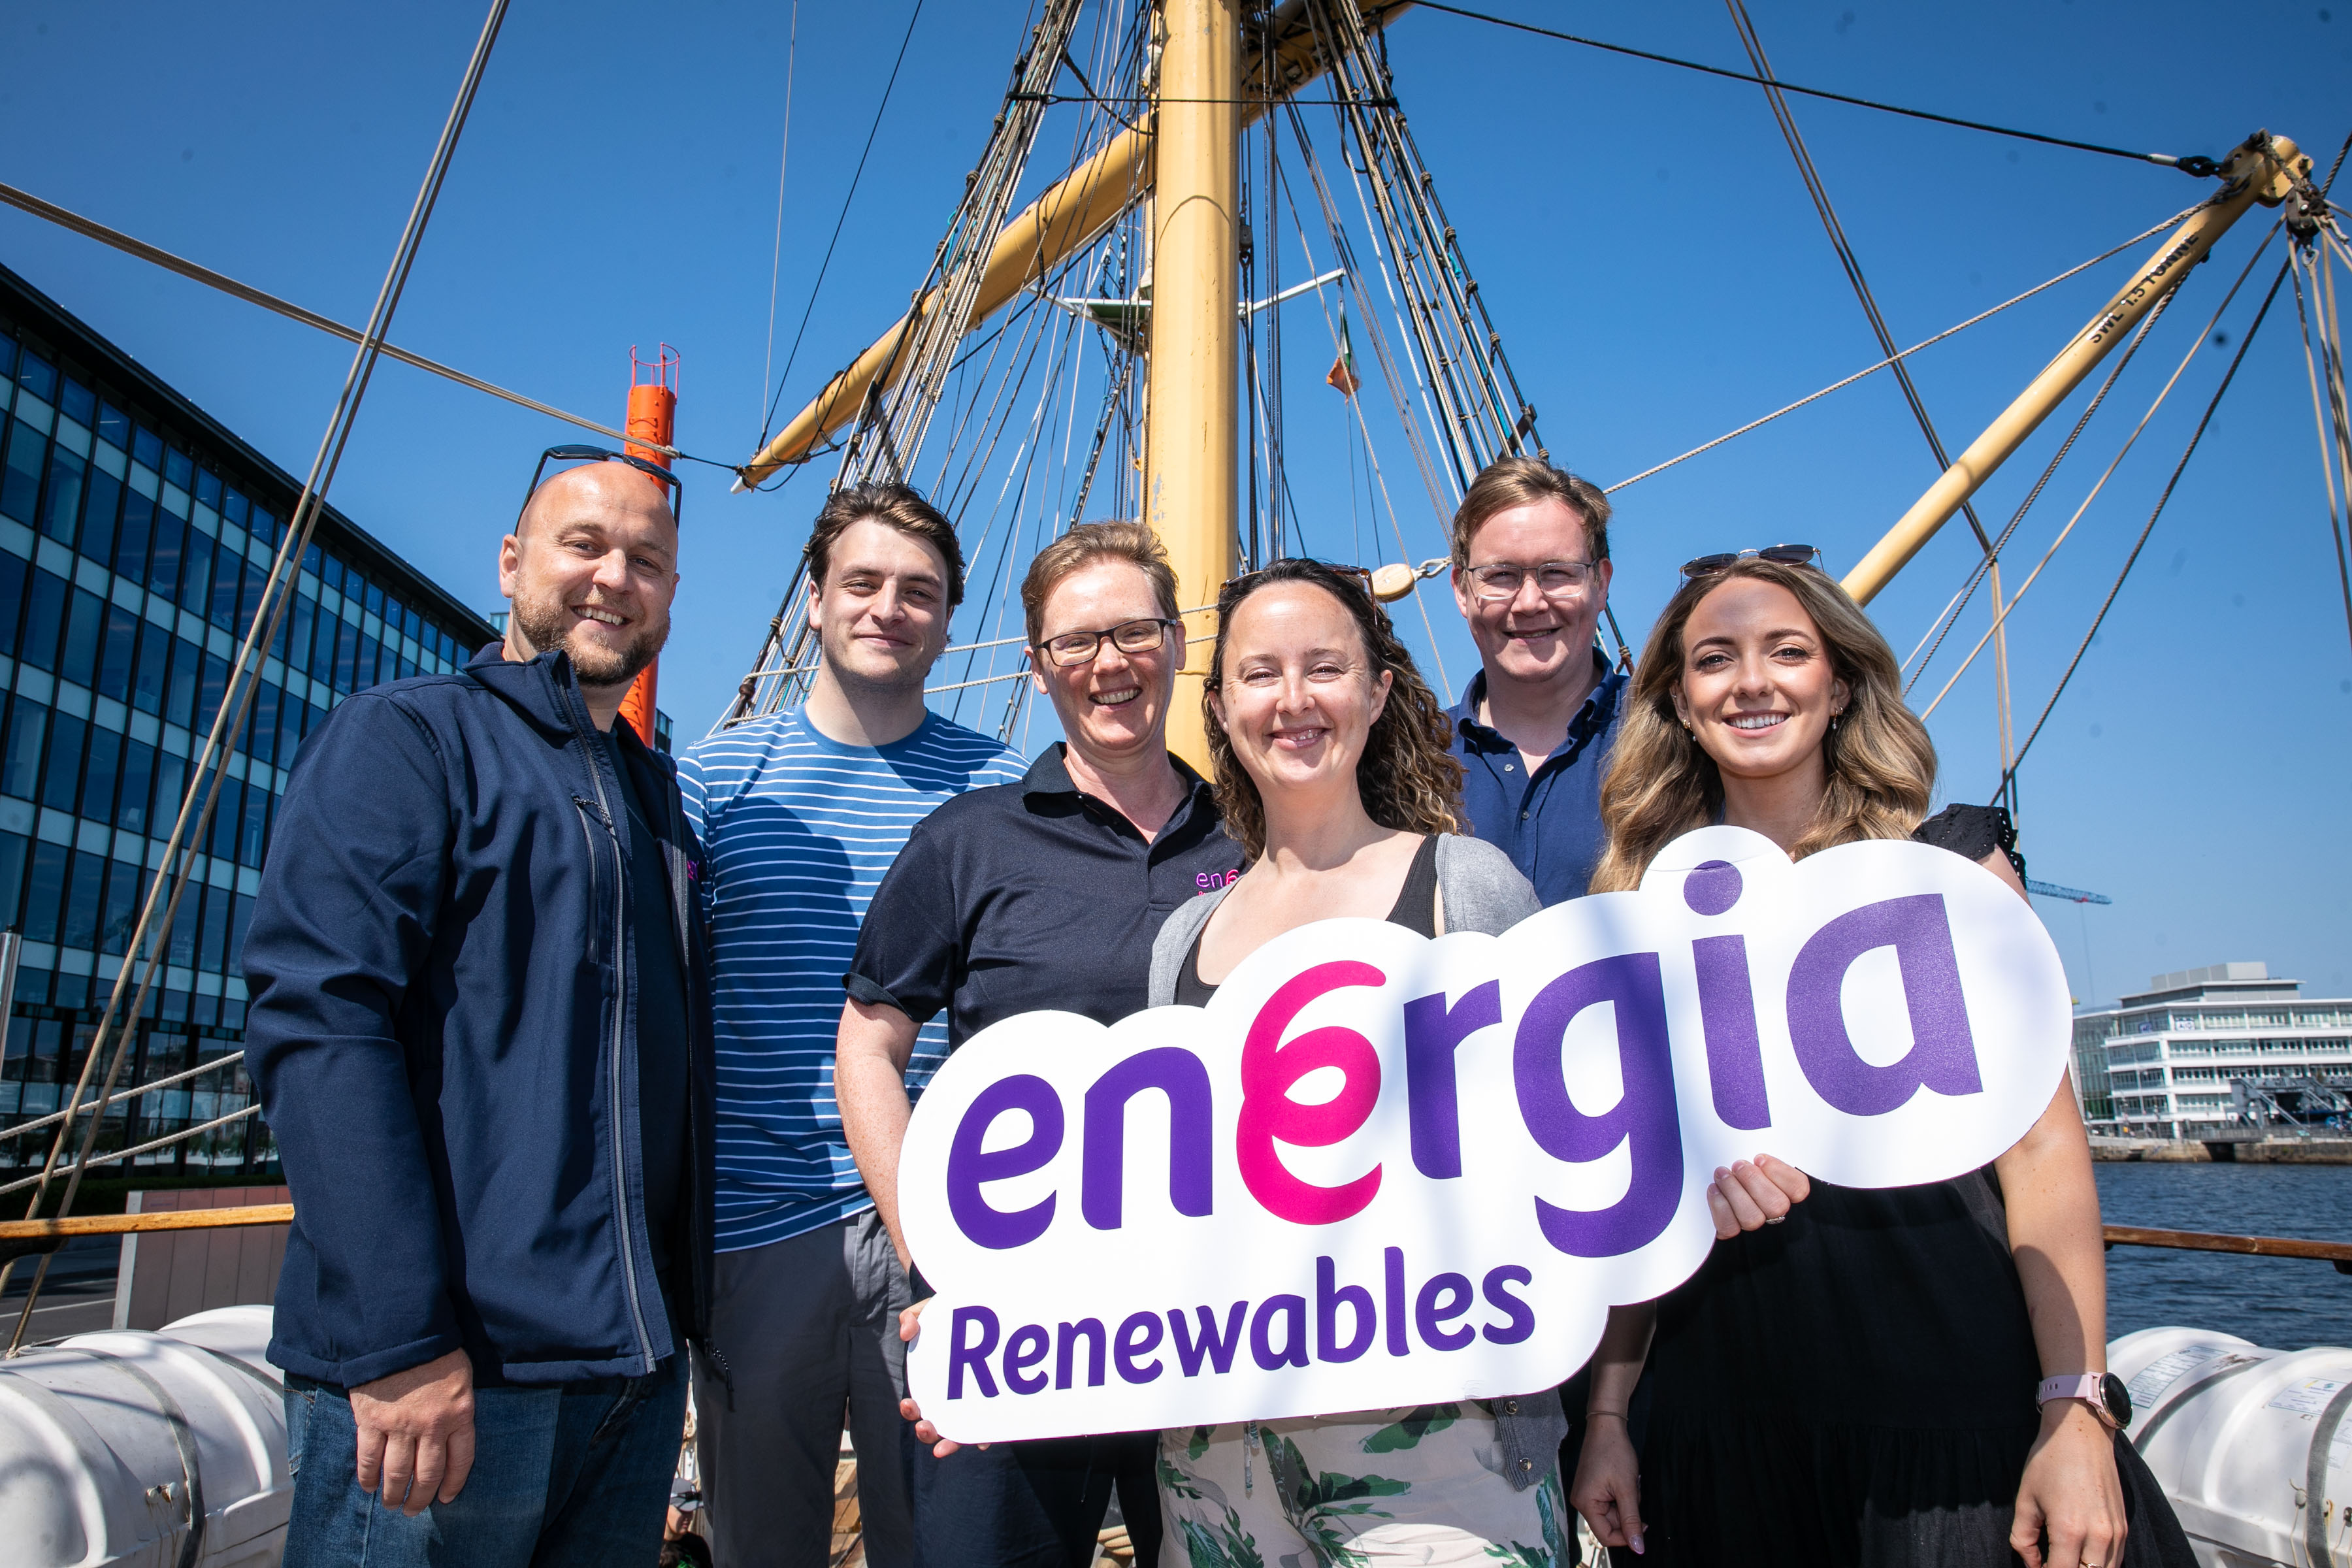 Energia Renewables announces partnership with Sail Training Ireland, supporting a voyage of empowerment aboard a tall ship for young people from Wexford 